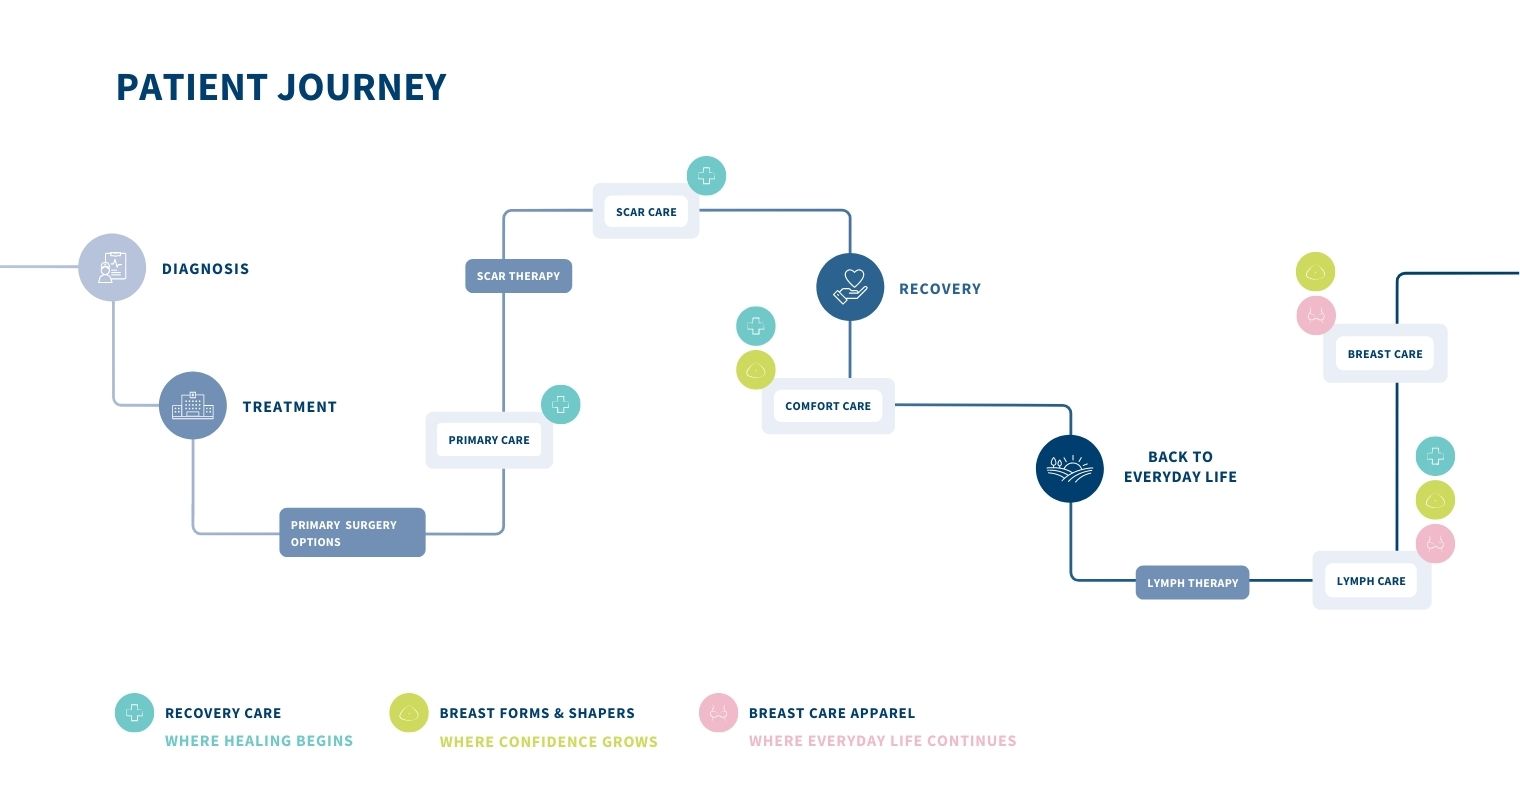 The Amoena Solution breast cancer patient journey map